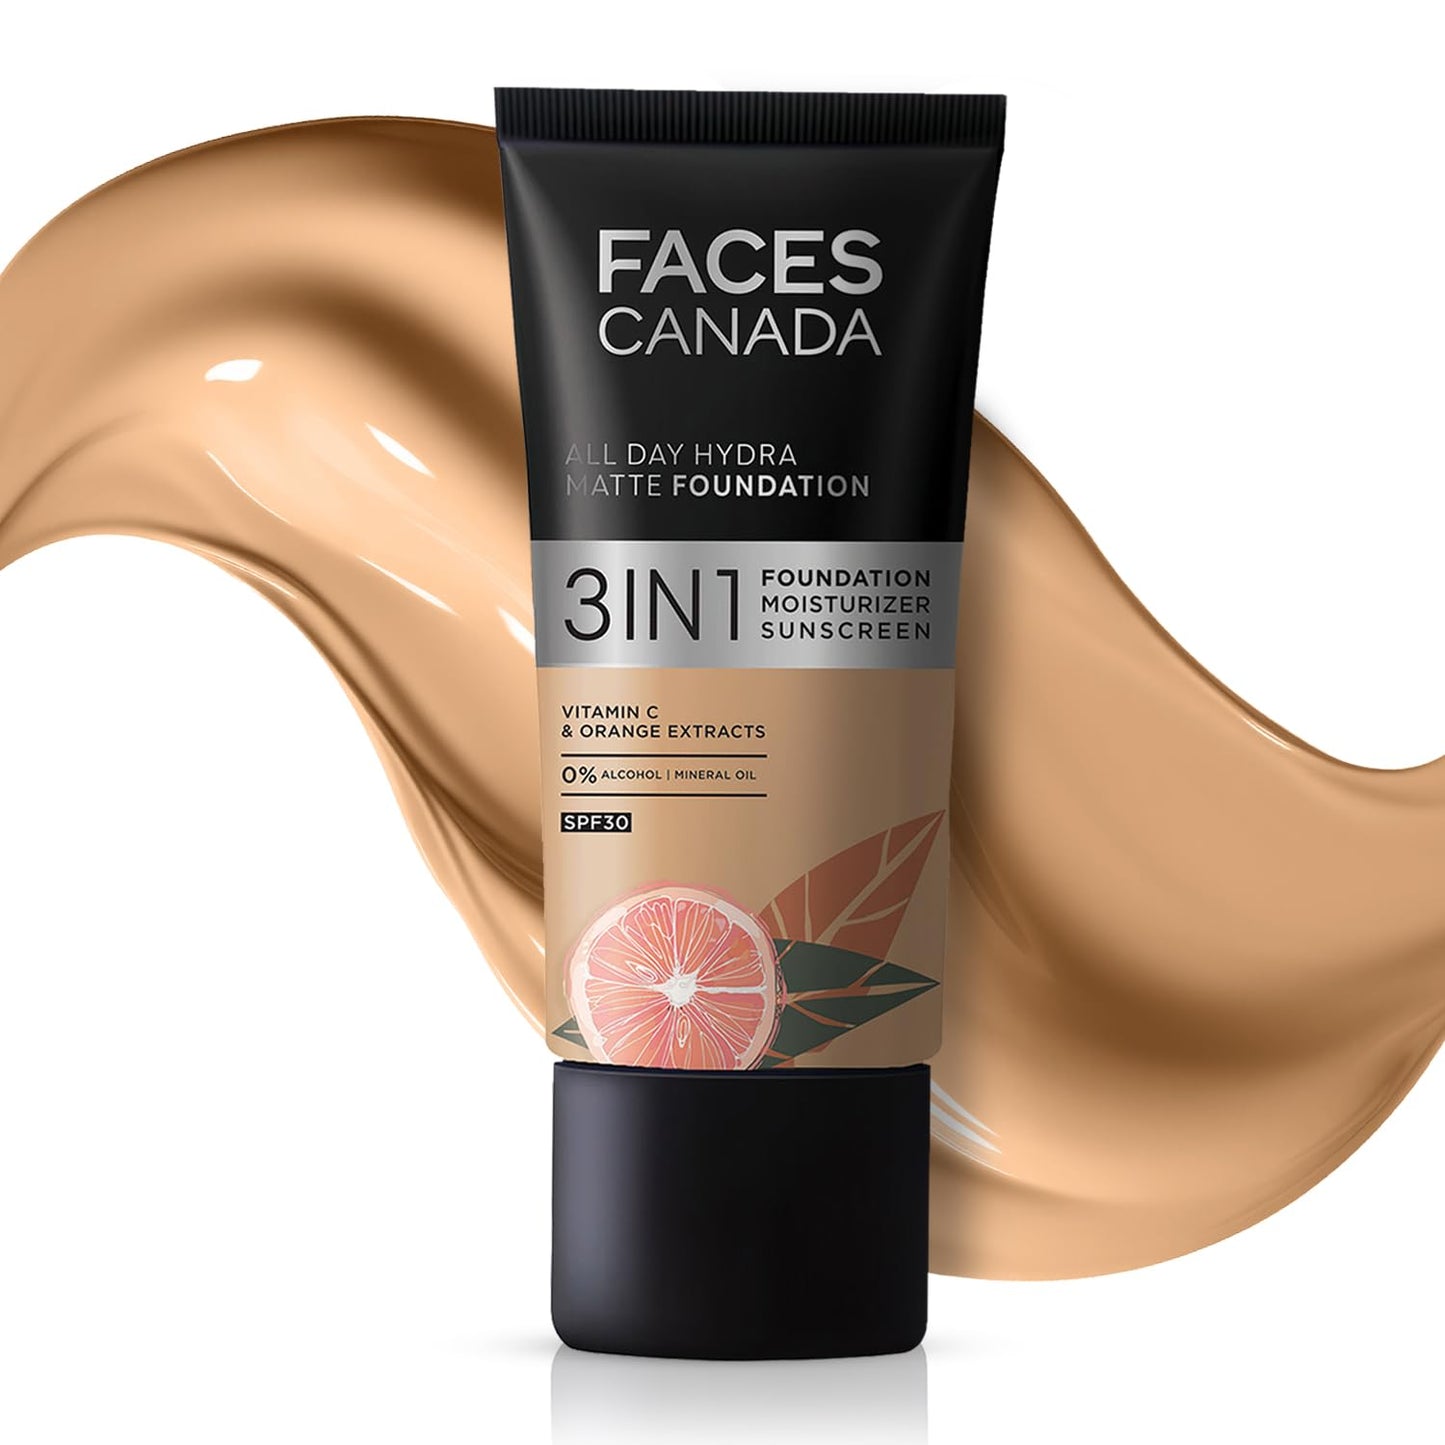 FACES CANADA 3 in 1 All Day Hydra Matte Foundation